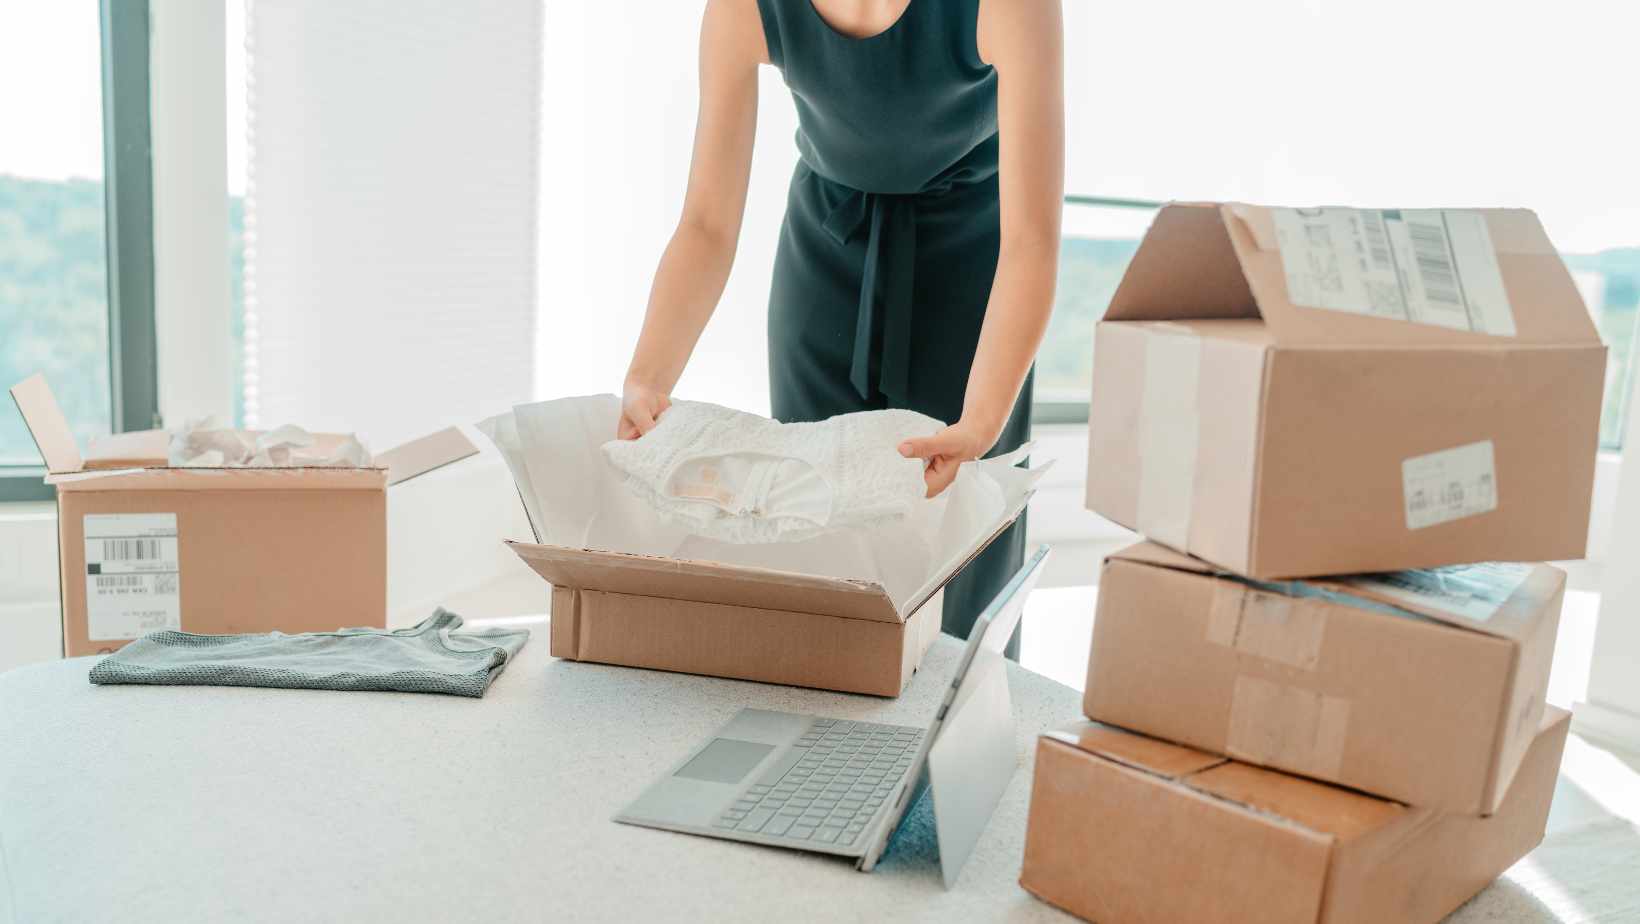 Can Your Shipping & Returns Policy Affect Conversion Rates? 4 Examples Show How